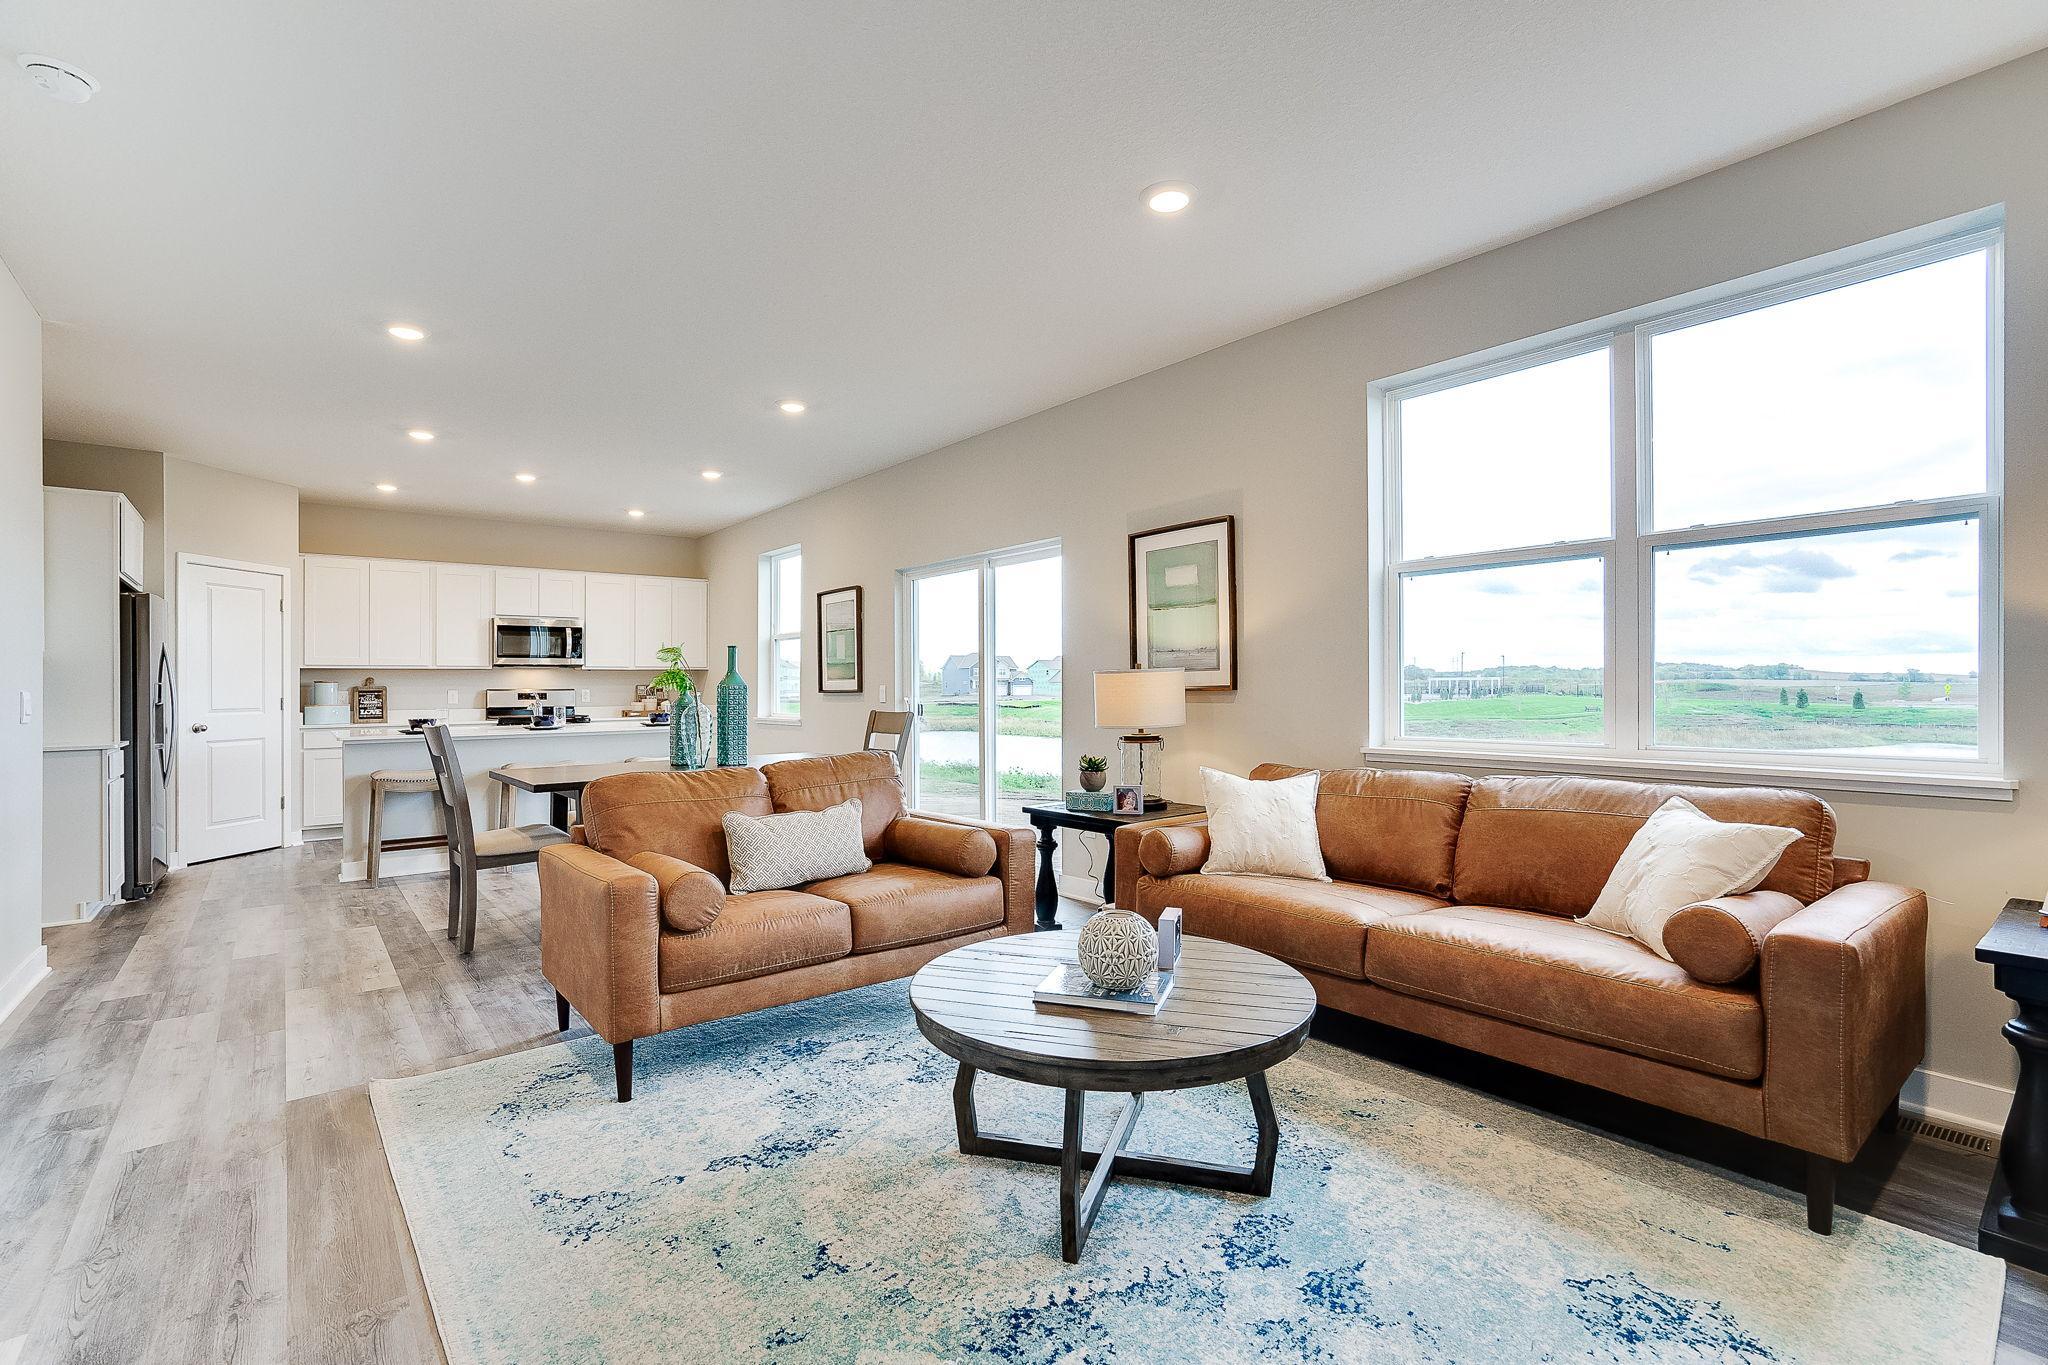 9-foot knockdown ceilings and LED lighting really open up the main floor. (Model home, colors will vary)